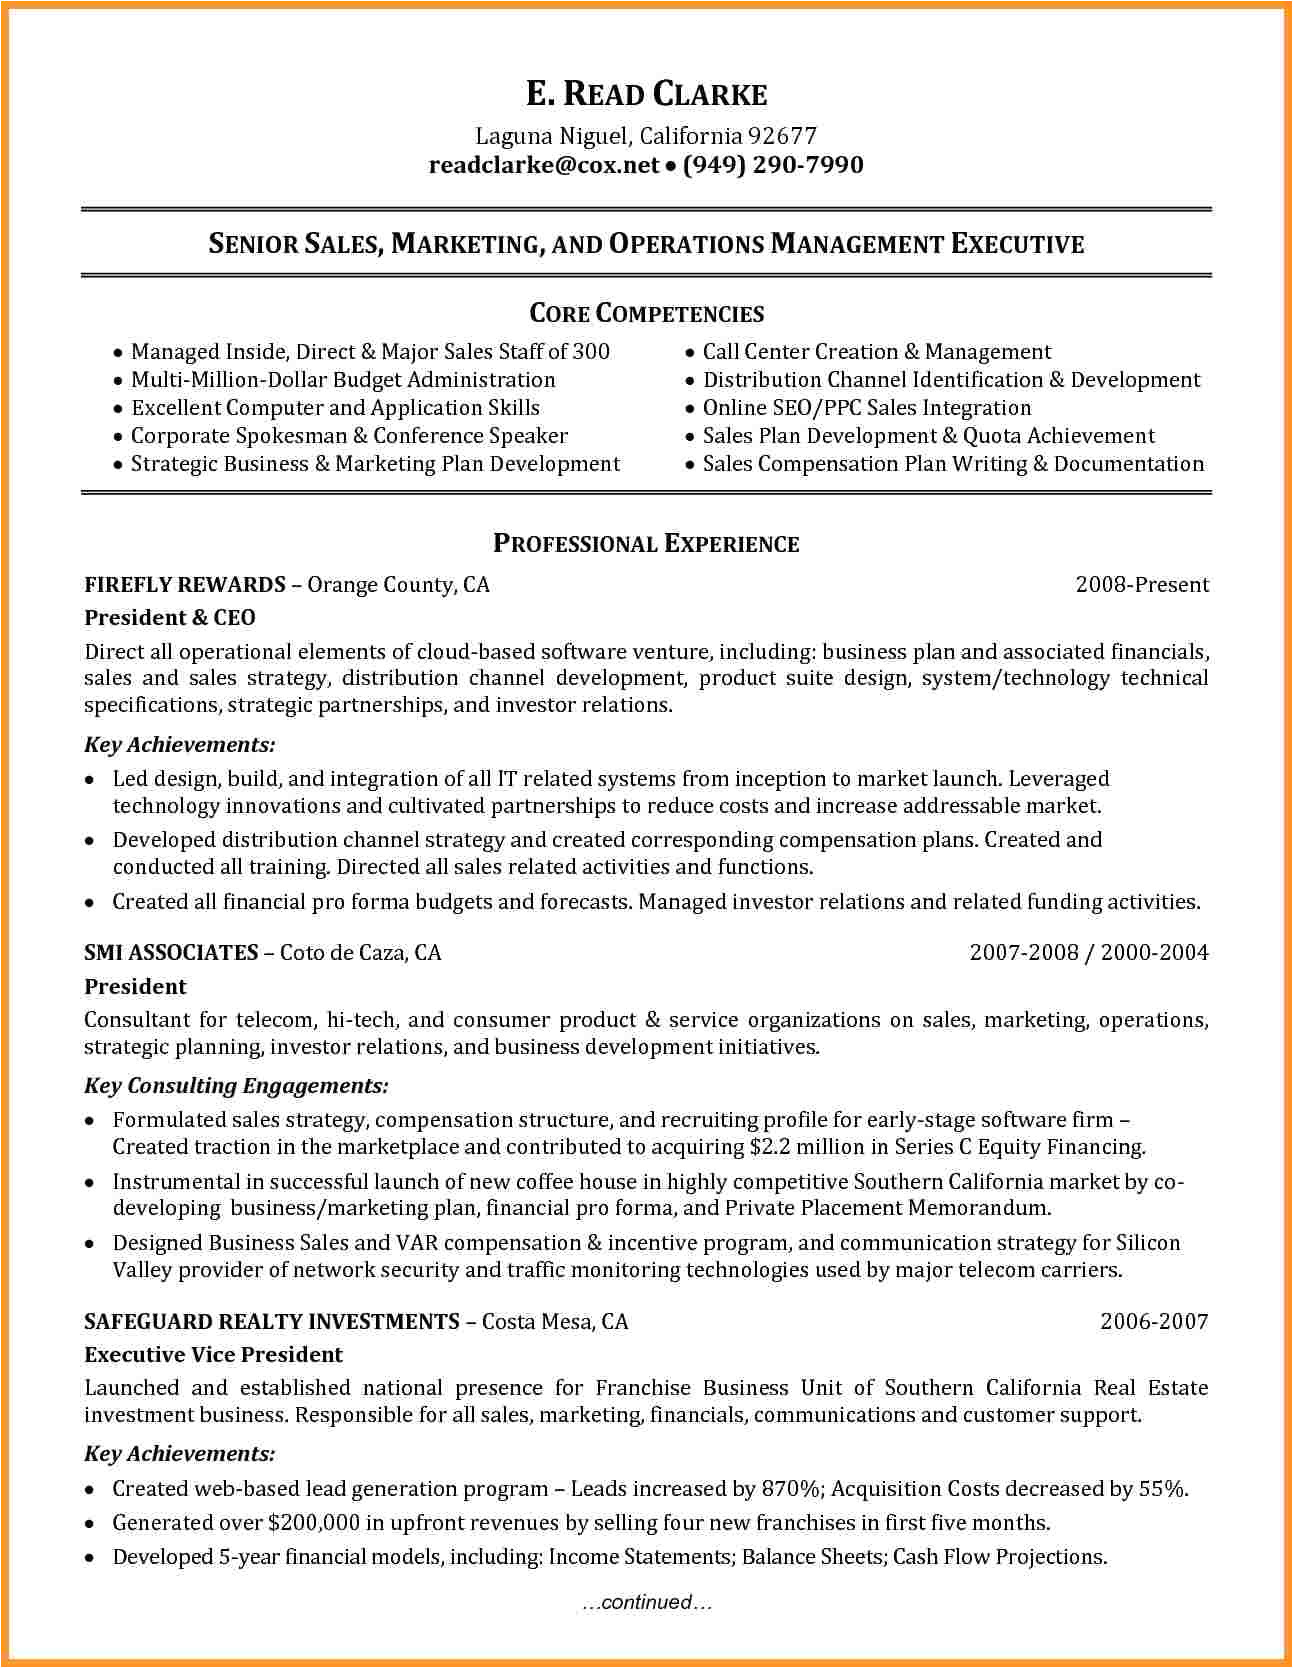 competency based resumes pdf